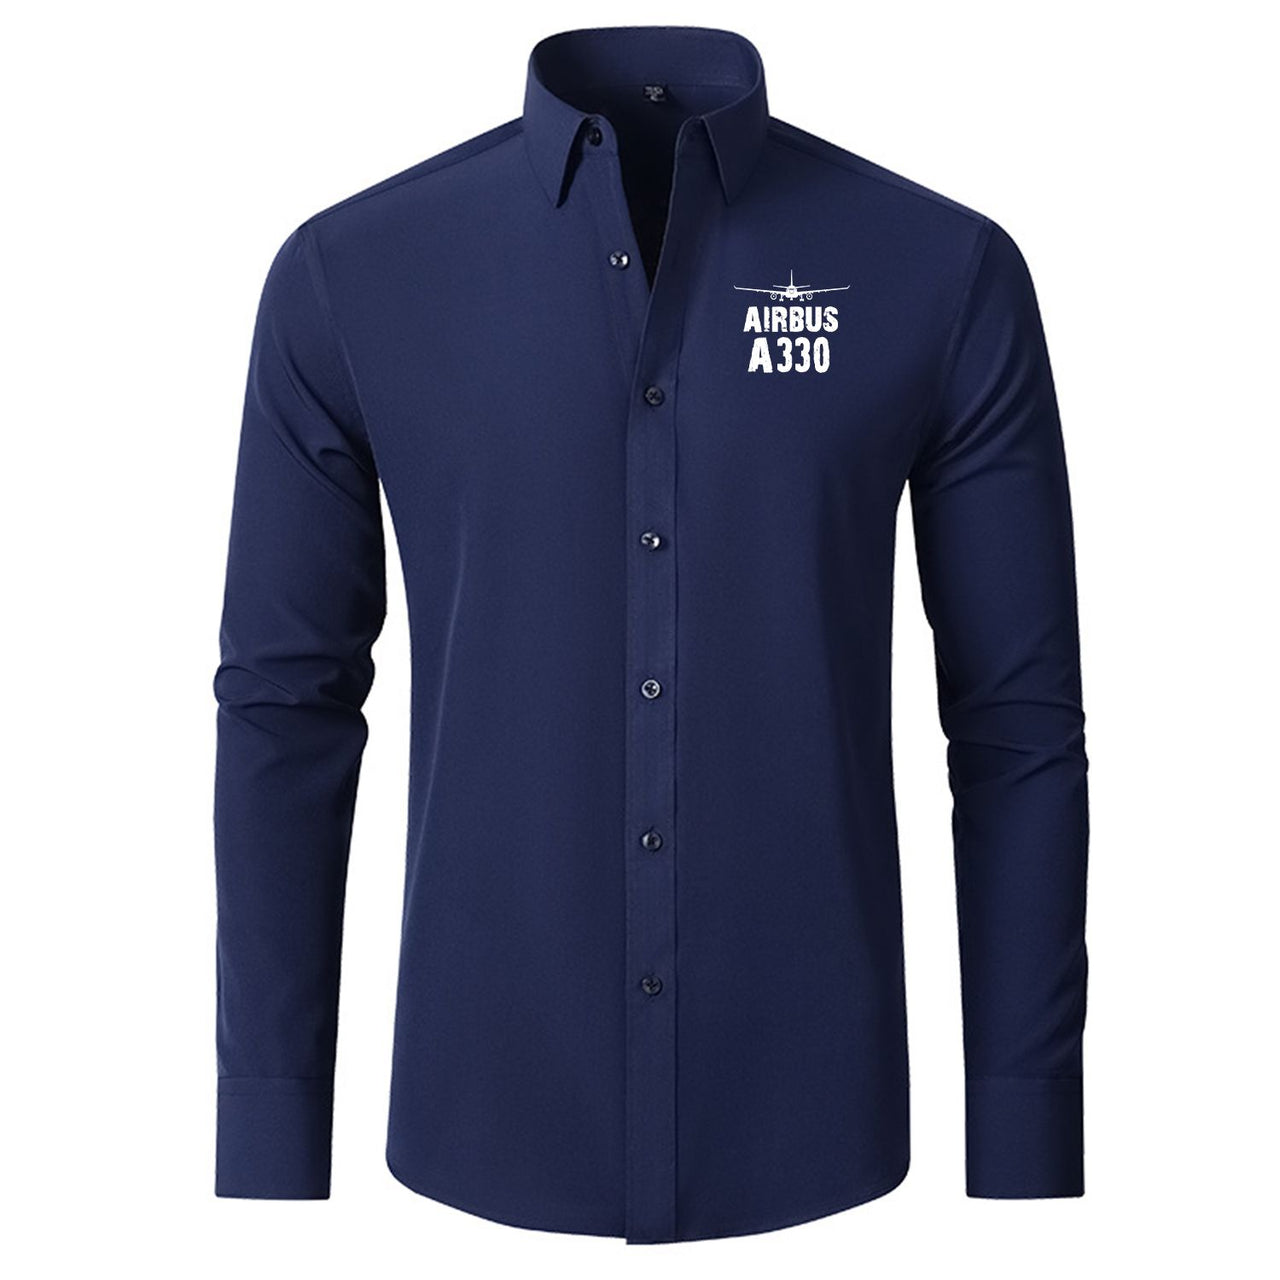 Airbus A330 & Plane Designed Long Sleeve Shirts